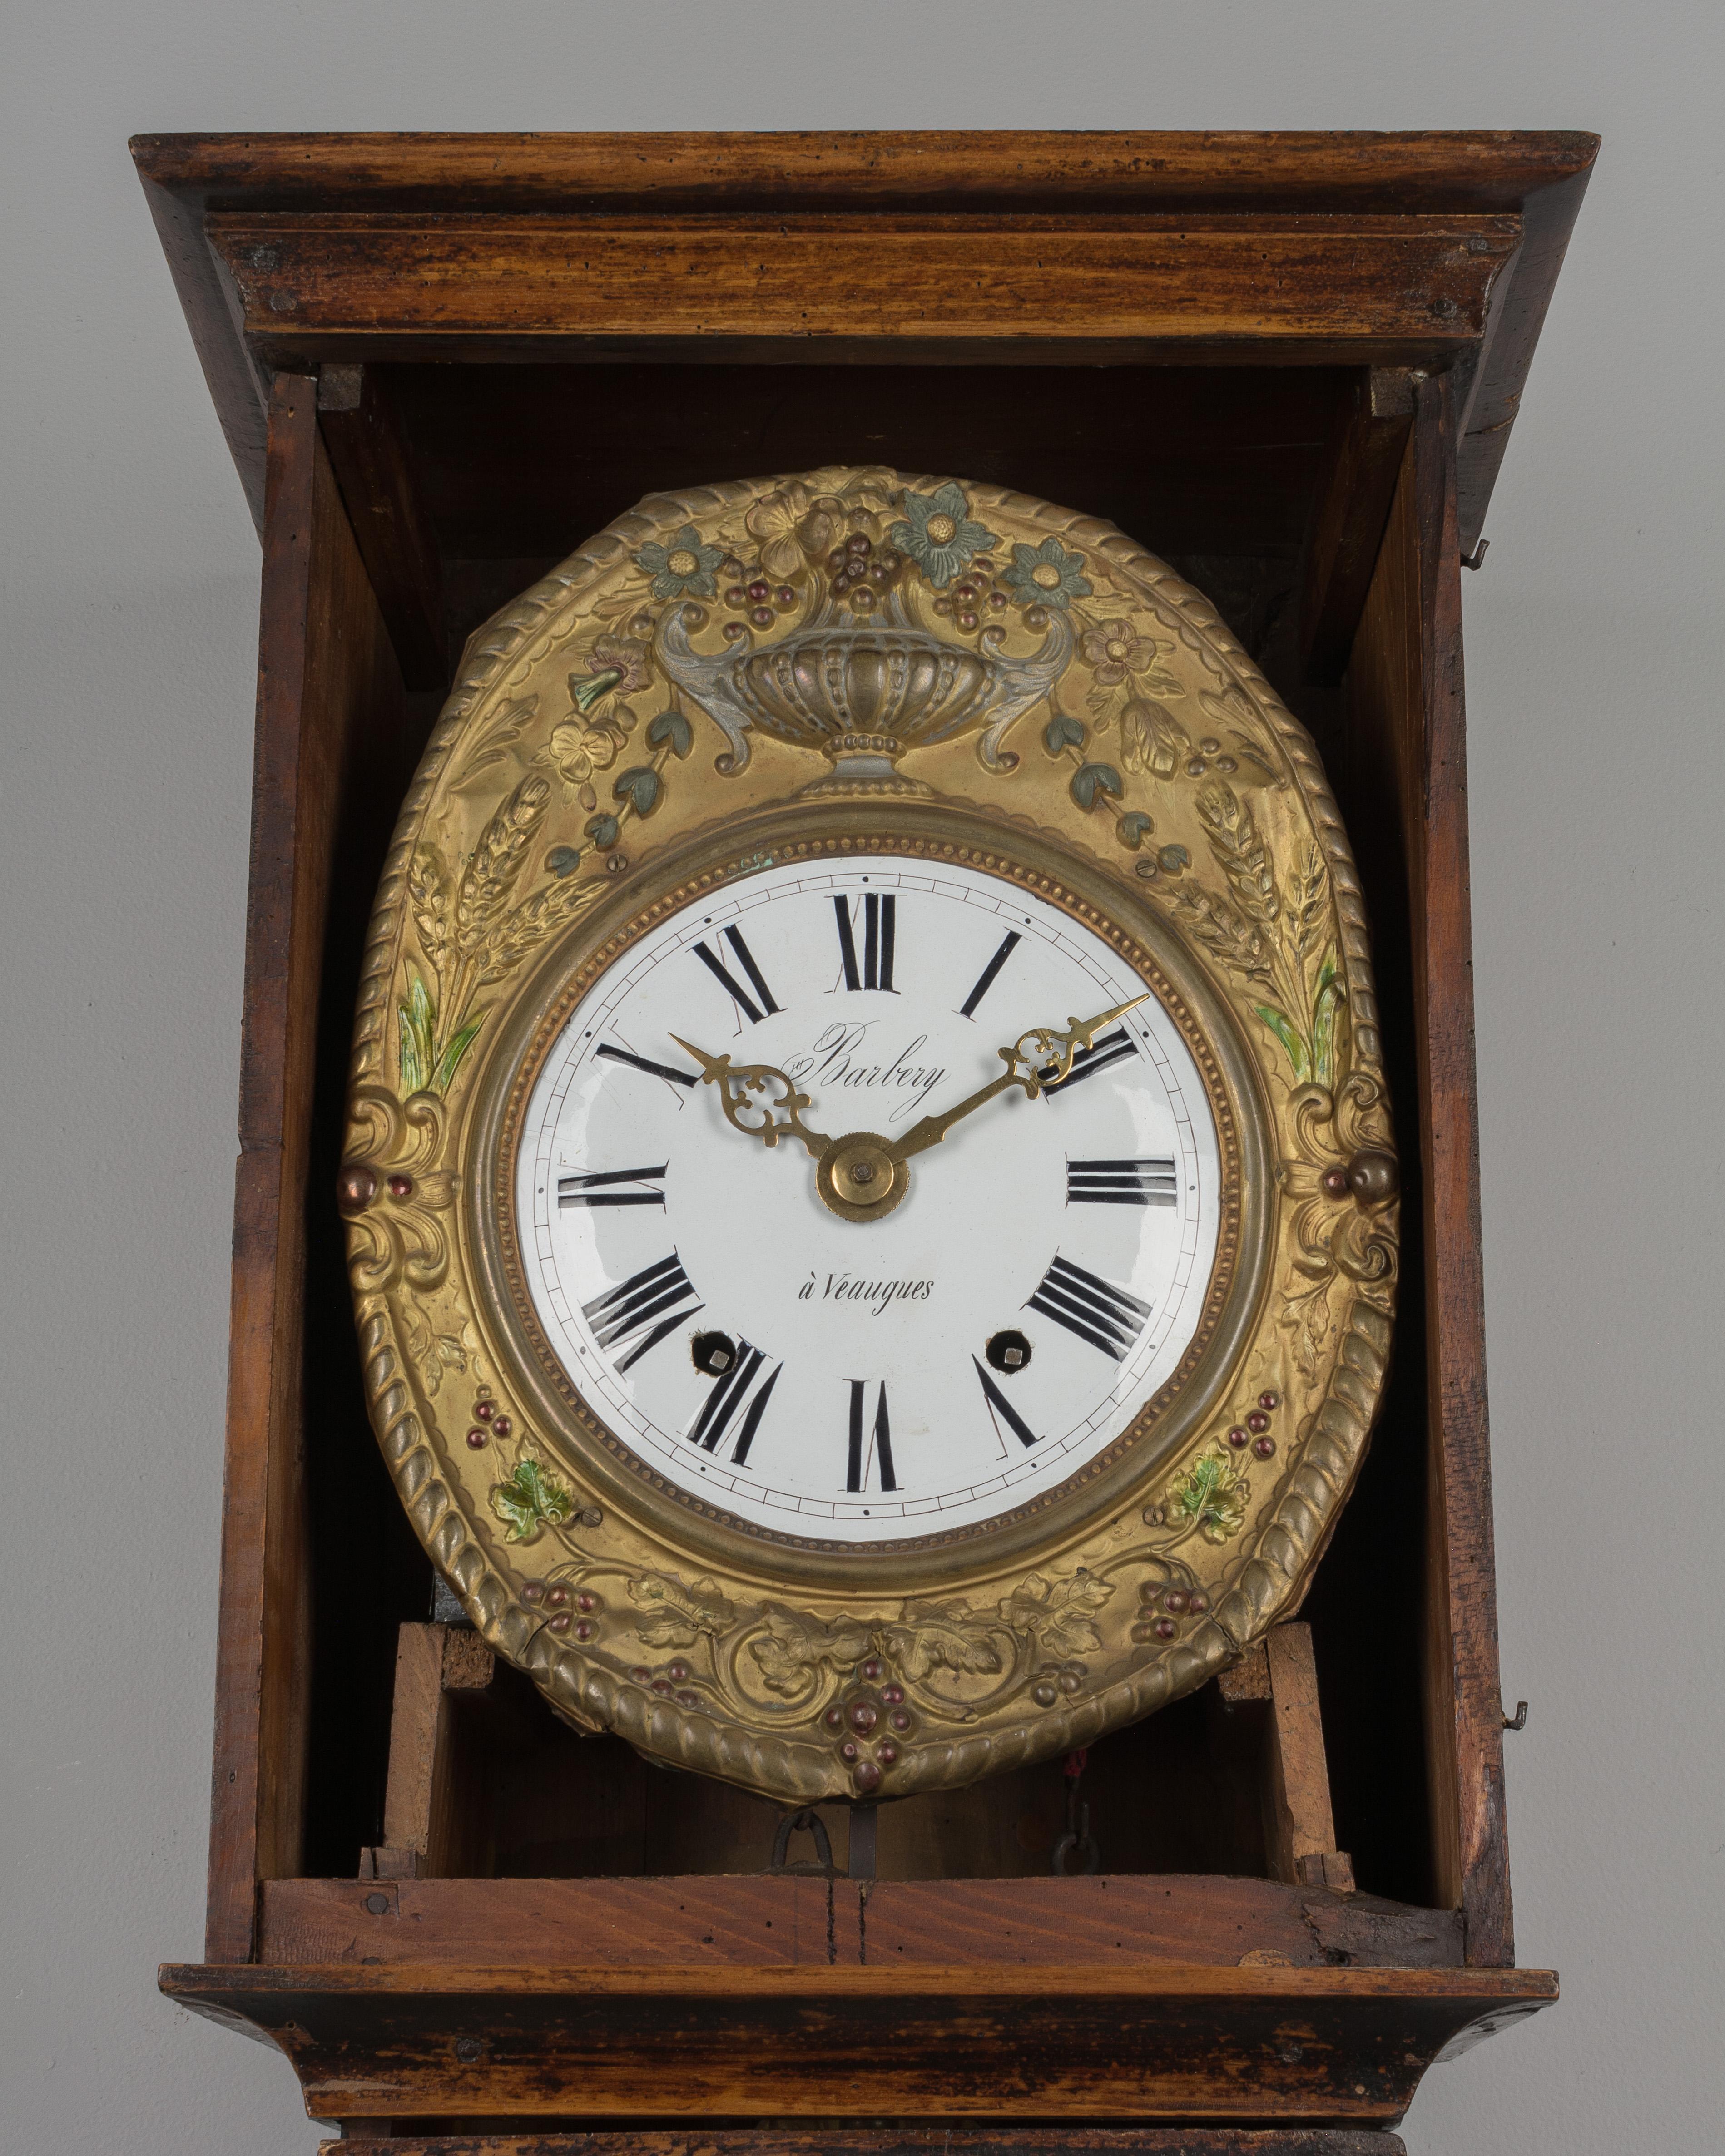 Hand-Painted 19th Century French Comtoise Grandfather Clock